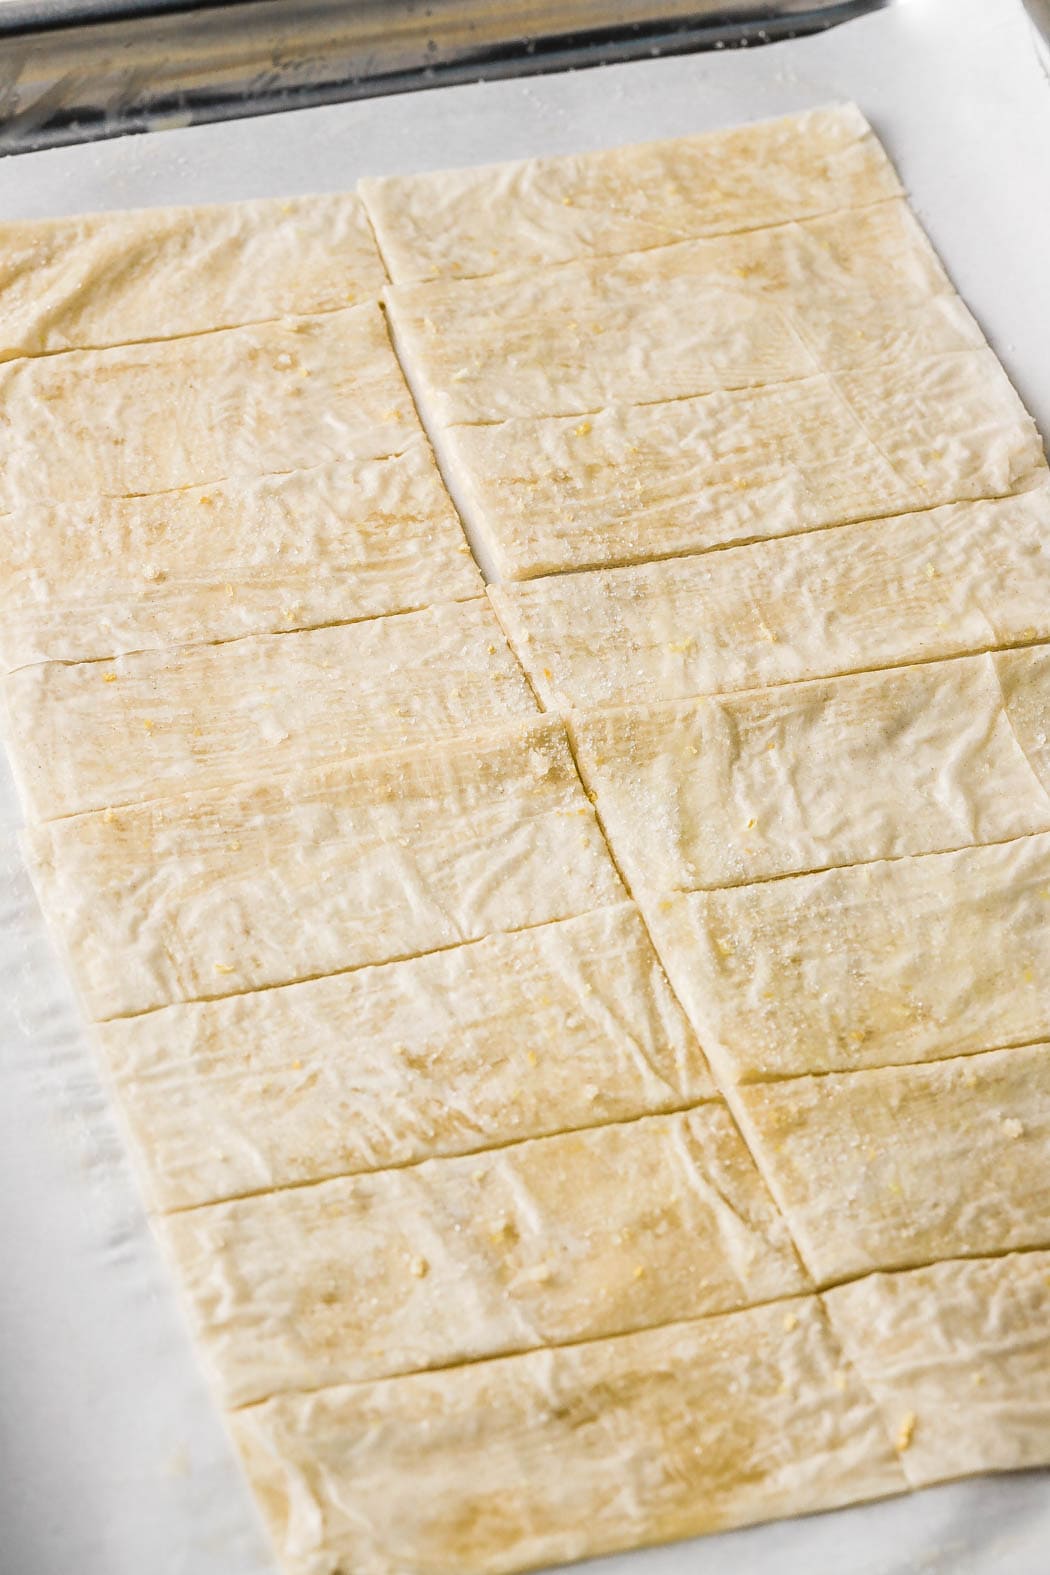 phyllo dough layers buttered up and sliced